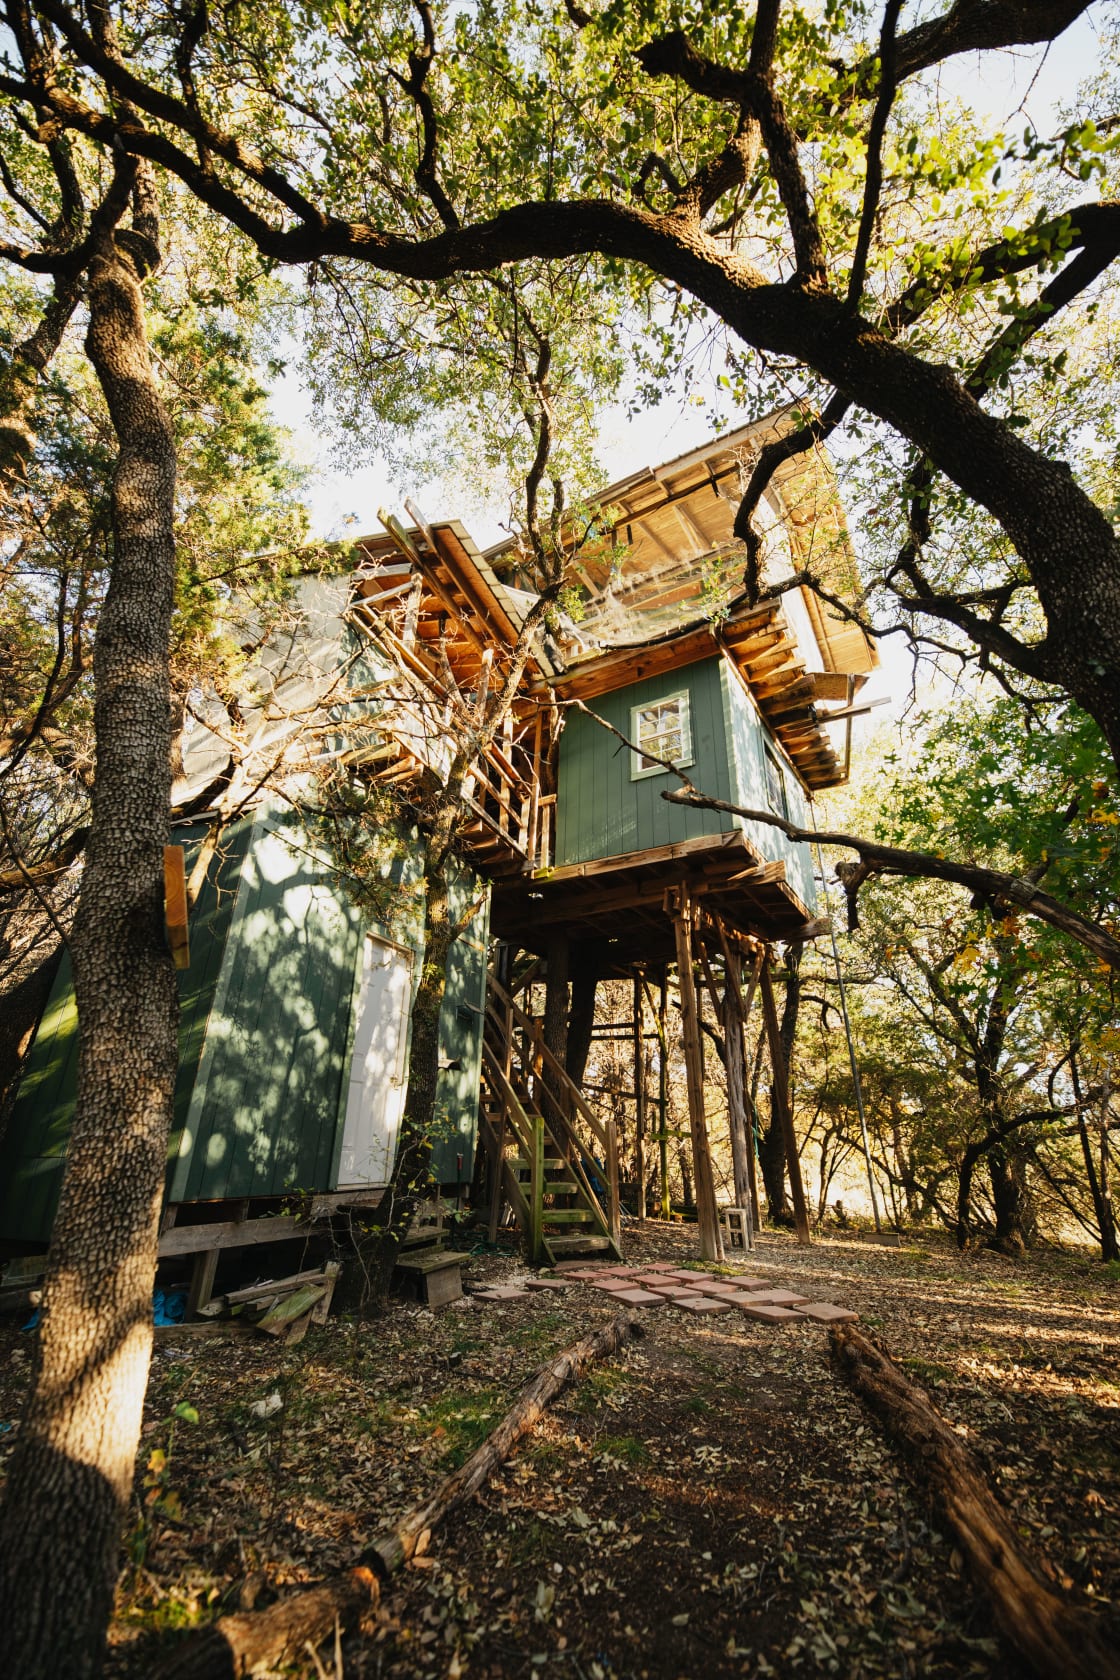 We could not believe our eyes when the trail led to this treehouse!